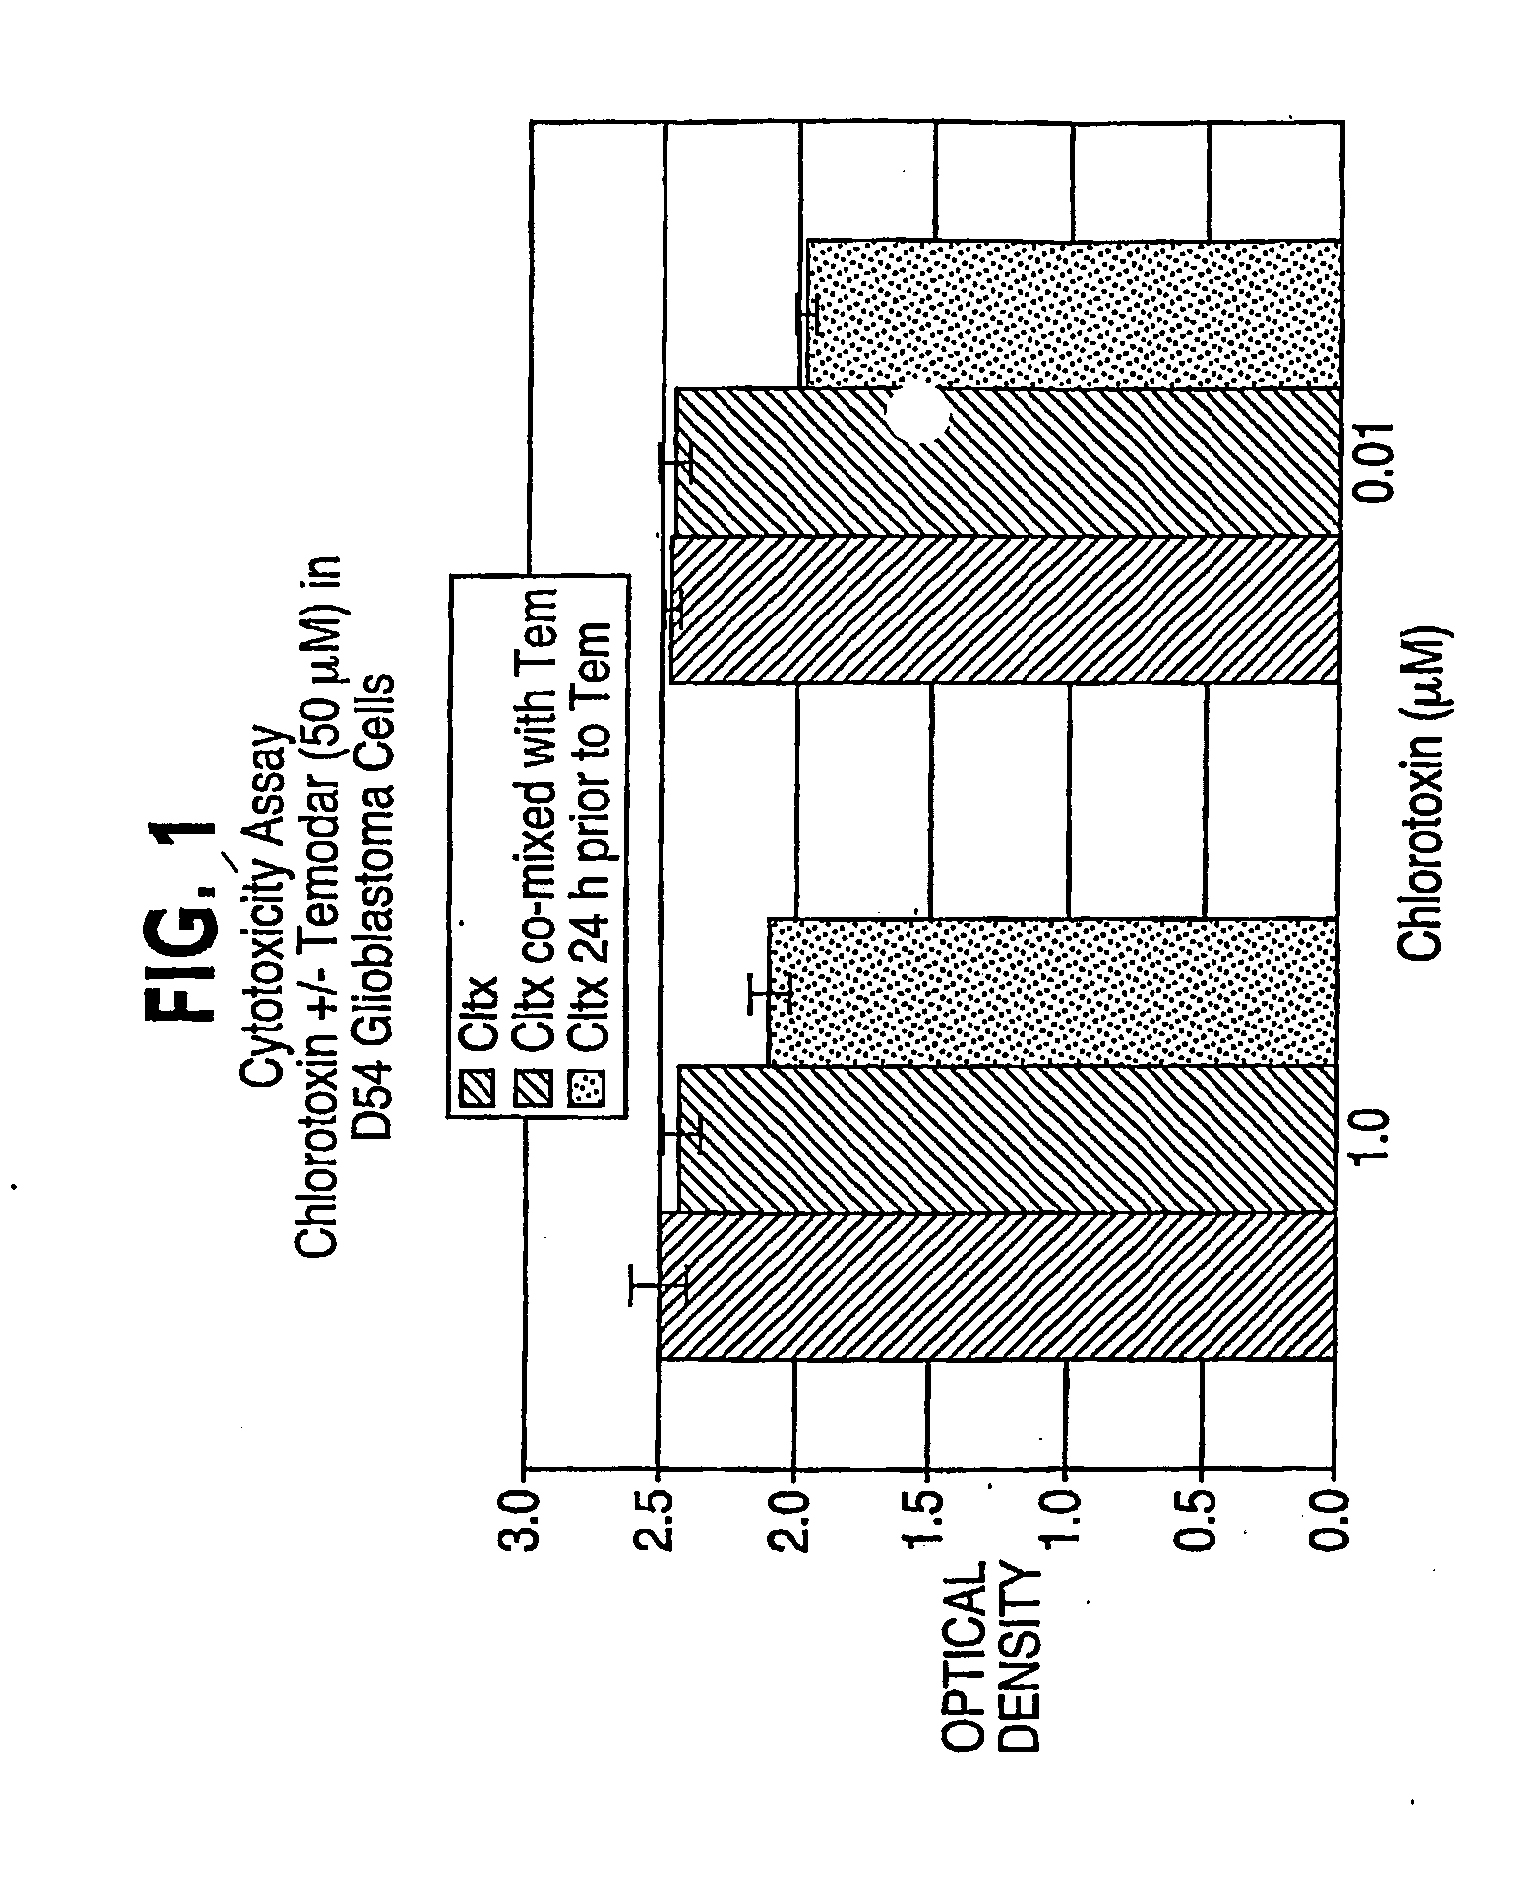 Combination chemotherapy with chlorotoxin